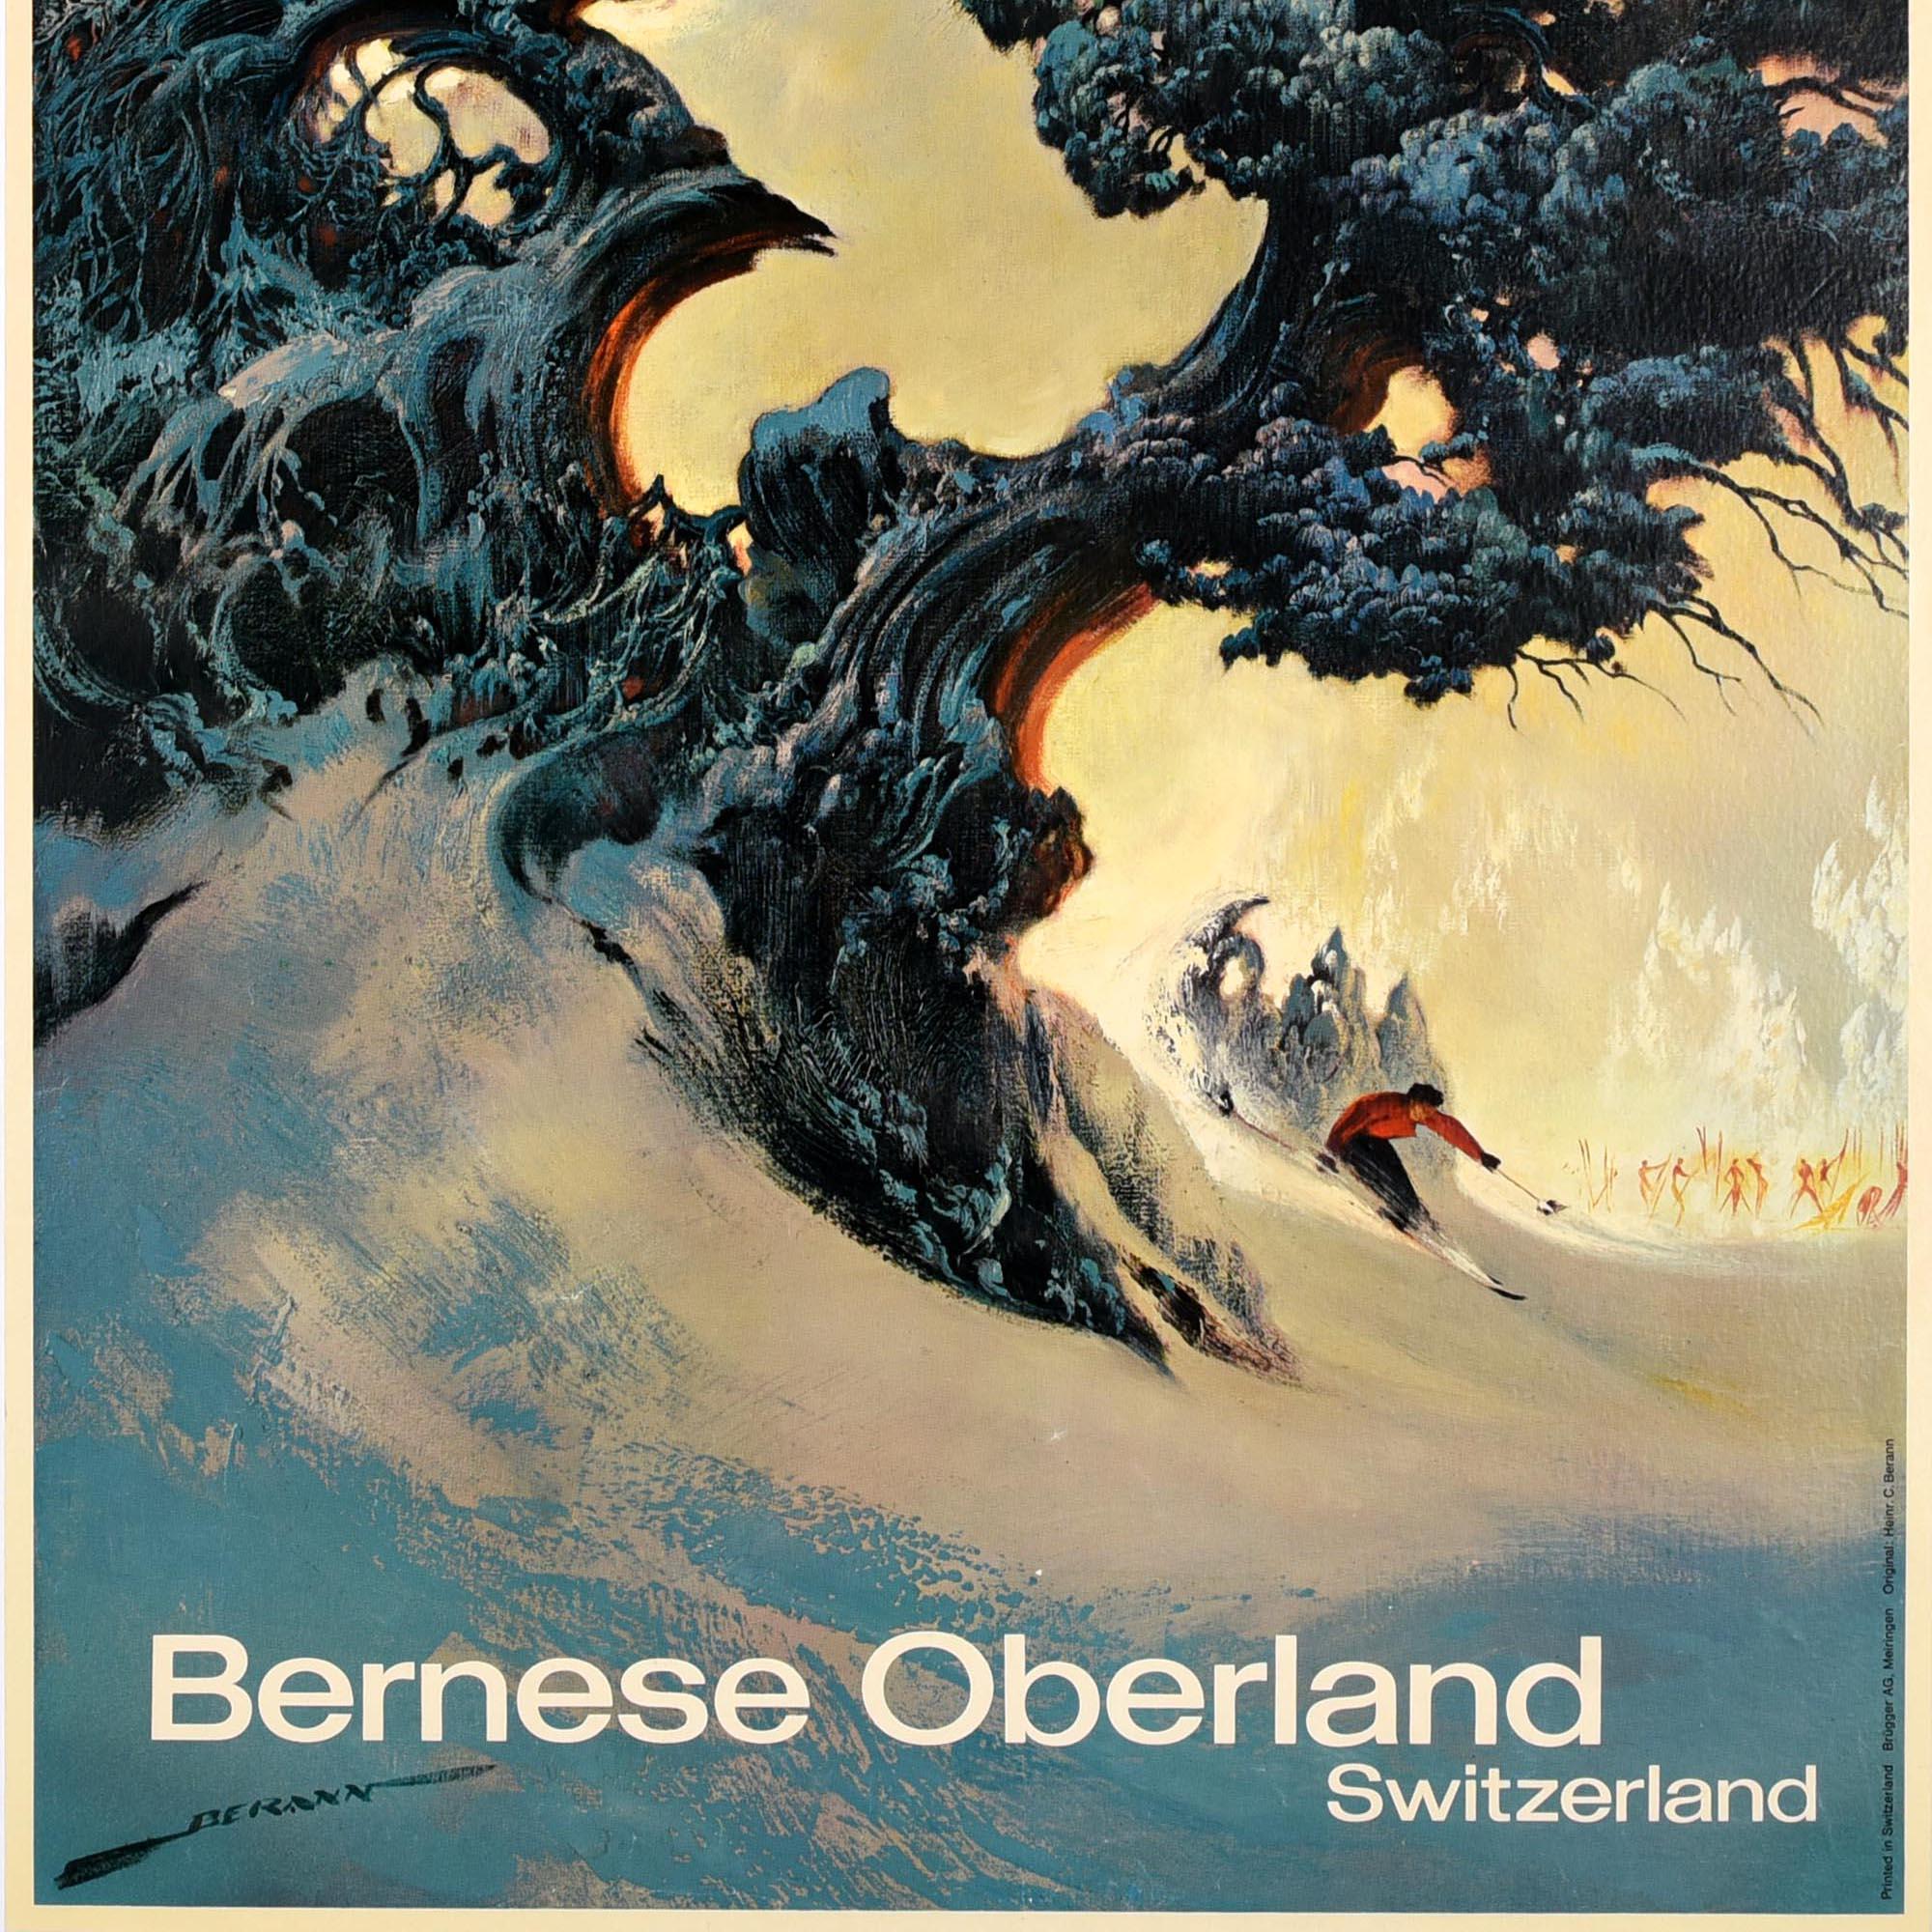 Original vintage ski and winter sport travel poster for the Bernese Oberland Switzerland featuring dramatic artwork by Heinrich Berann (1915-1999) depicting a skier skiing at speed behind a dark tree in the snow with figures holding their skis in